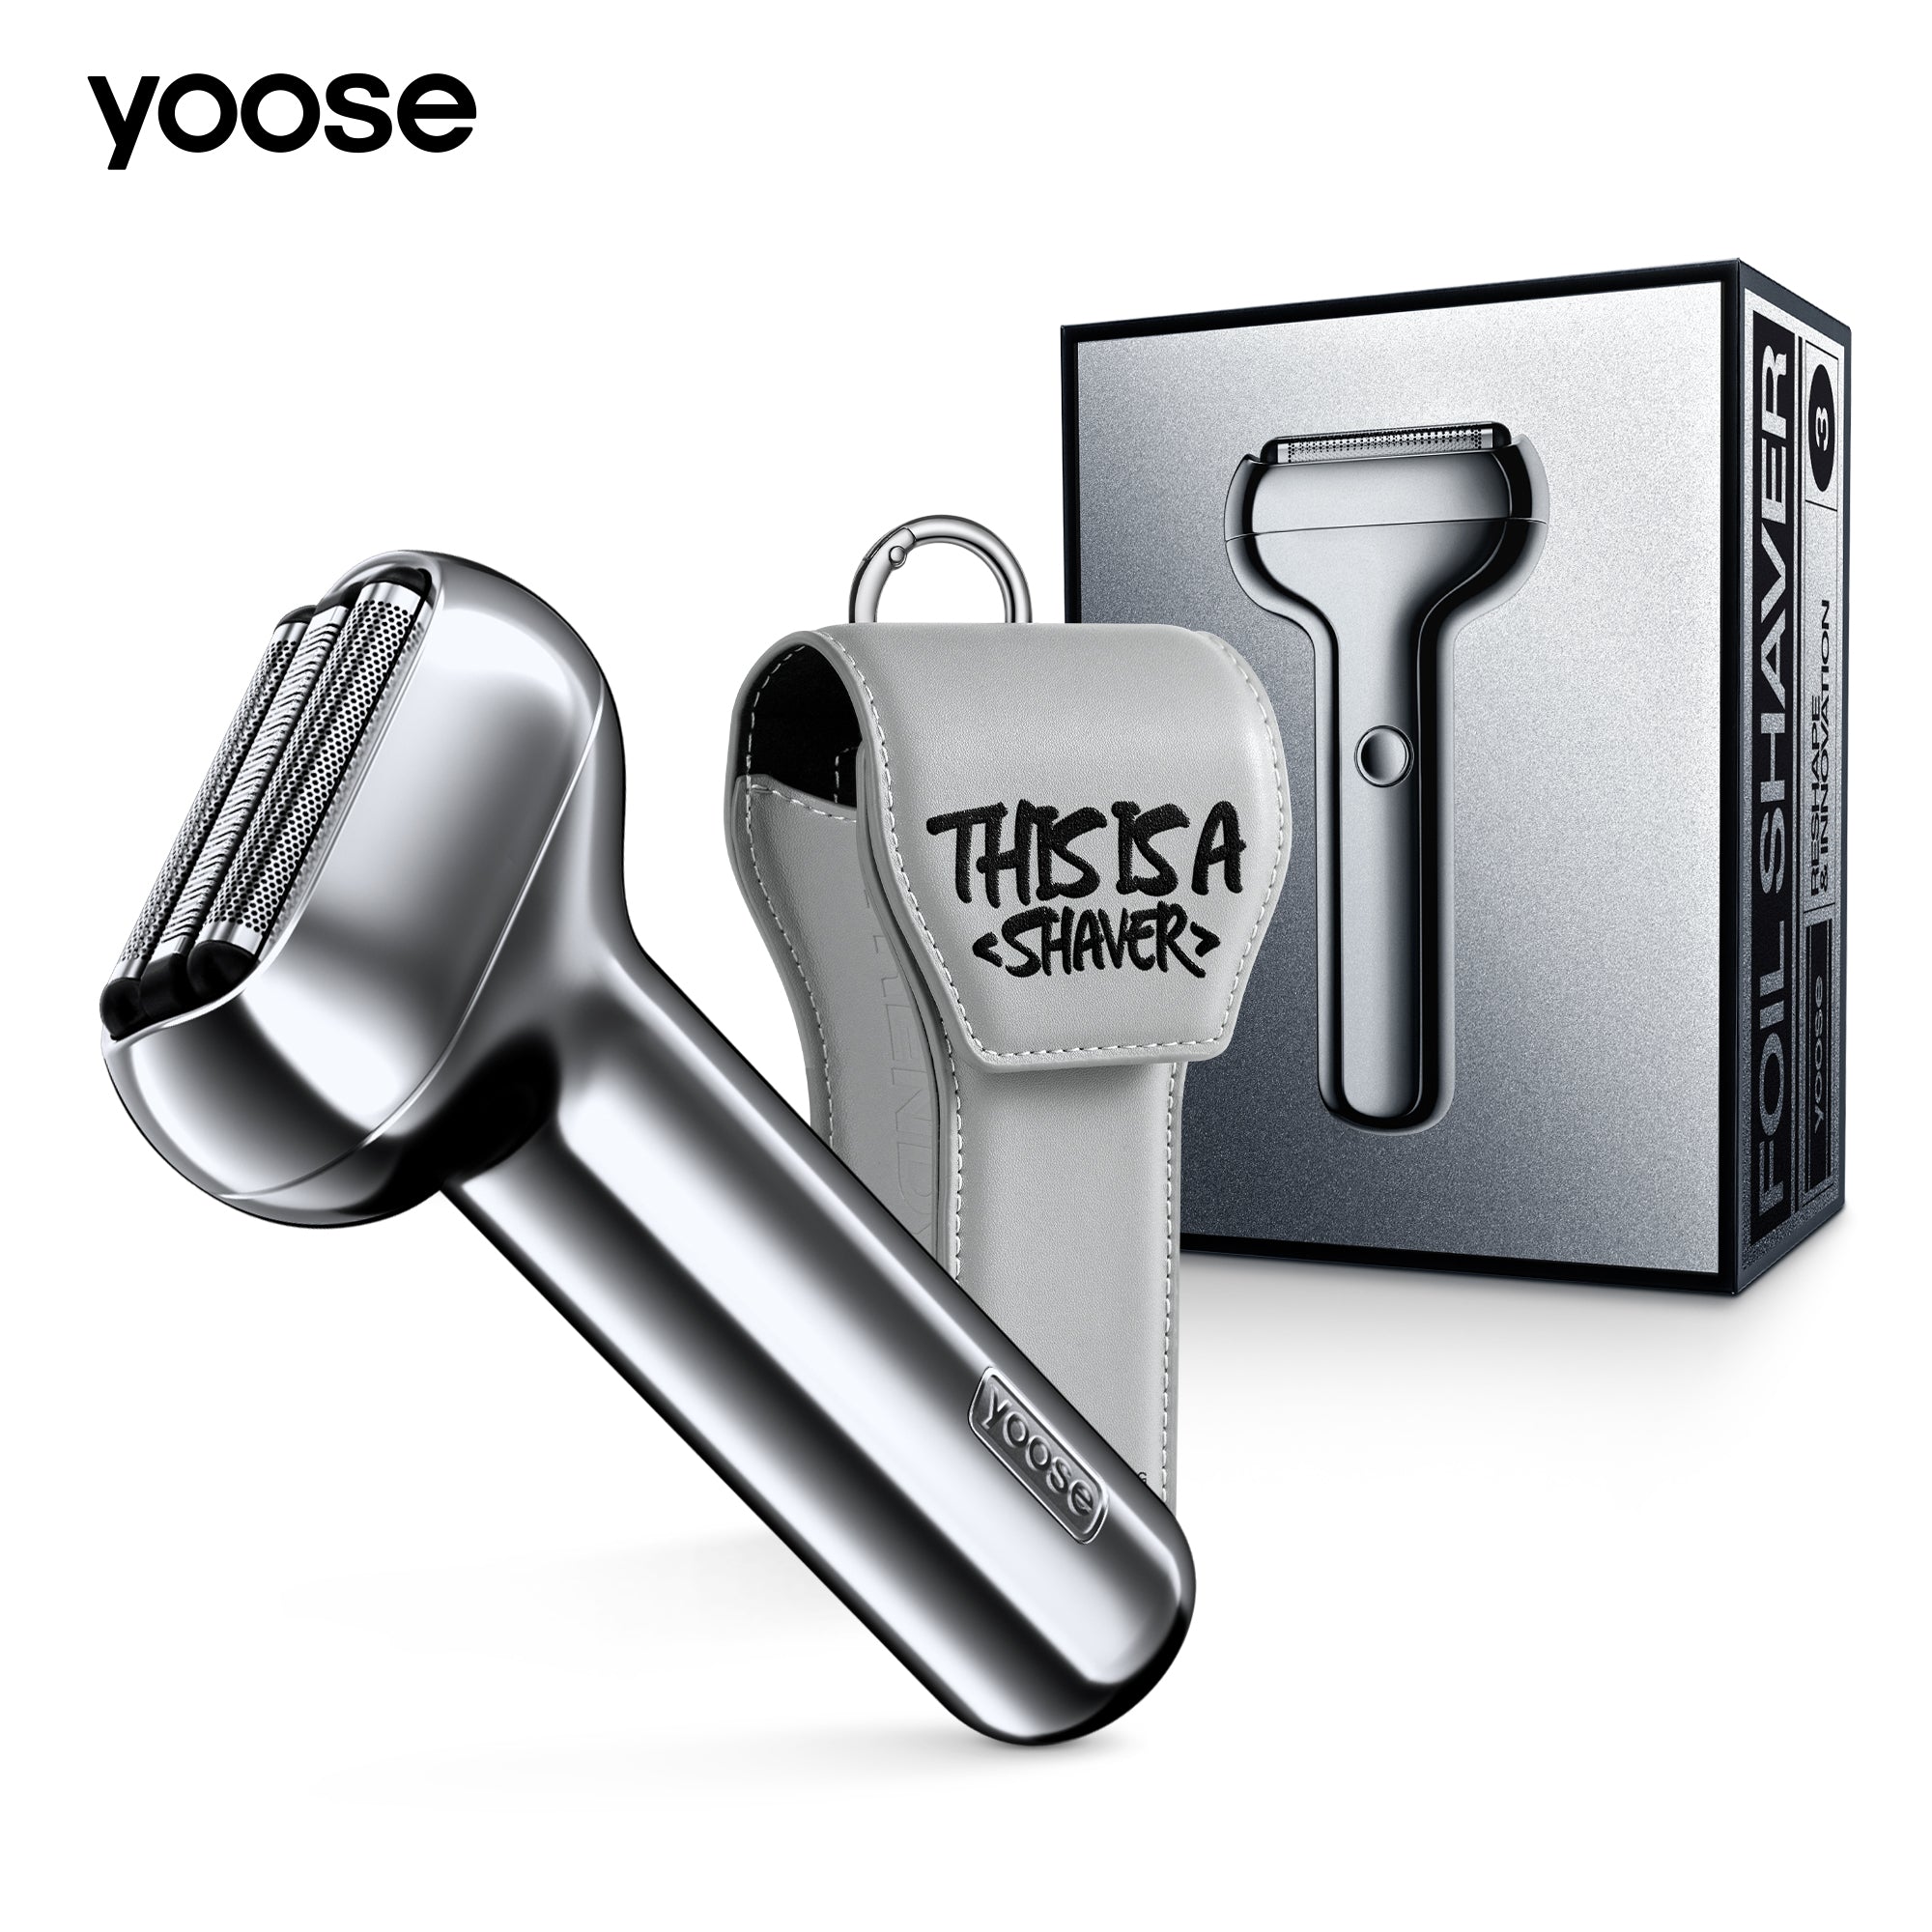 yoose Triple shaver what is includes _Silver color